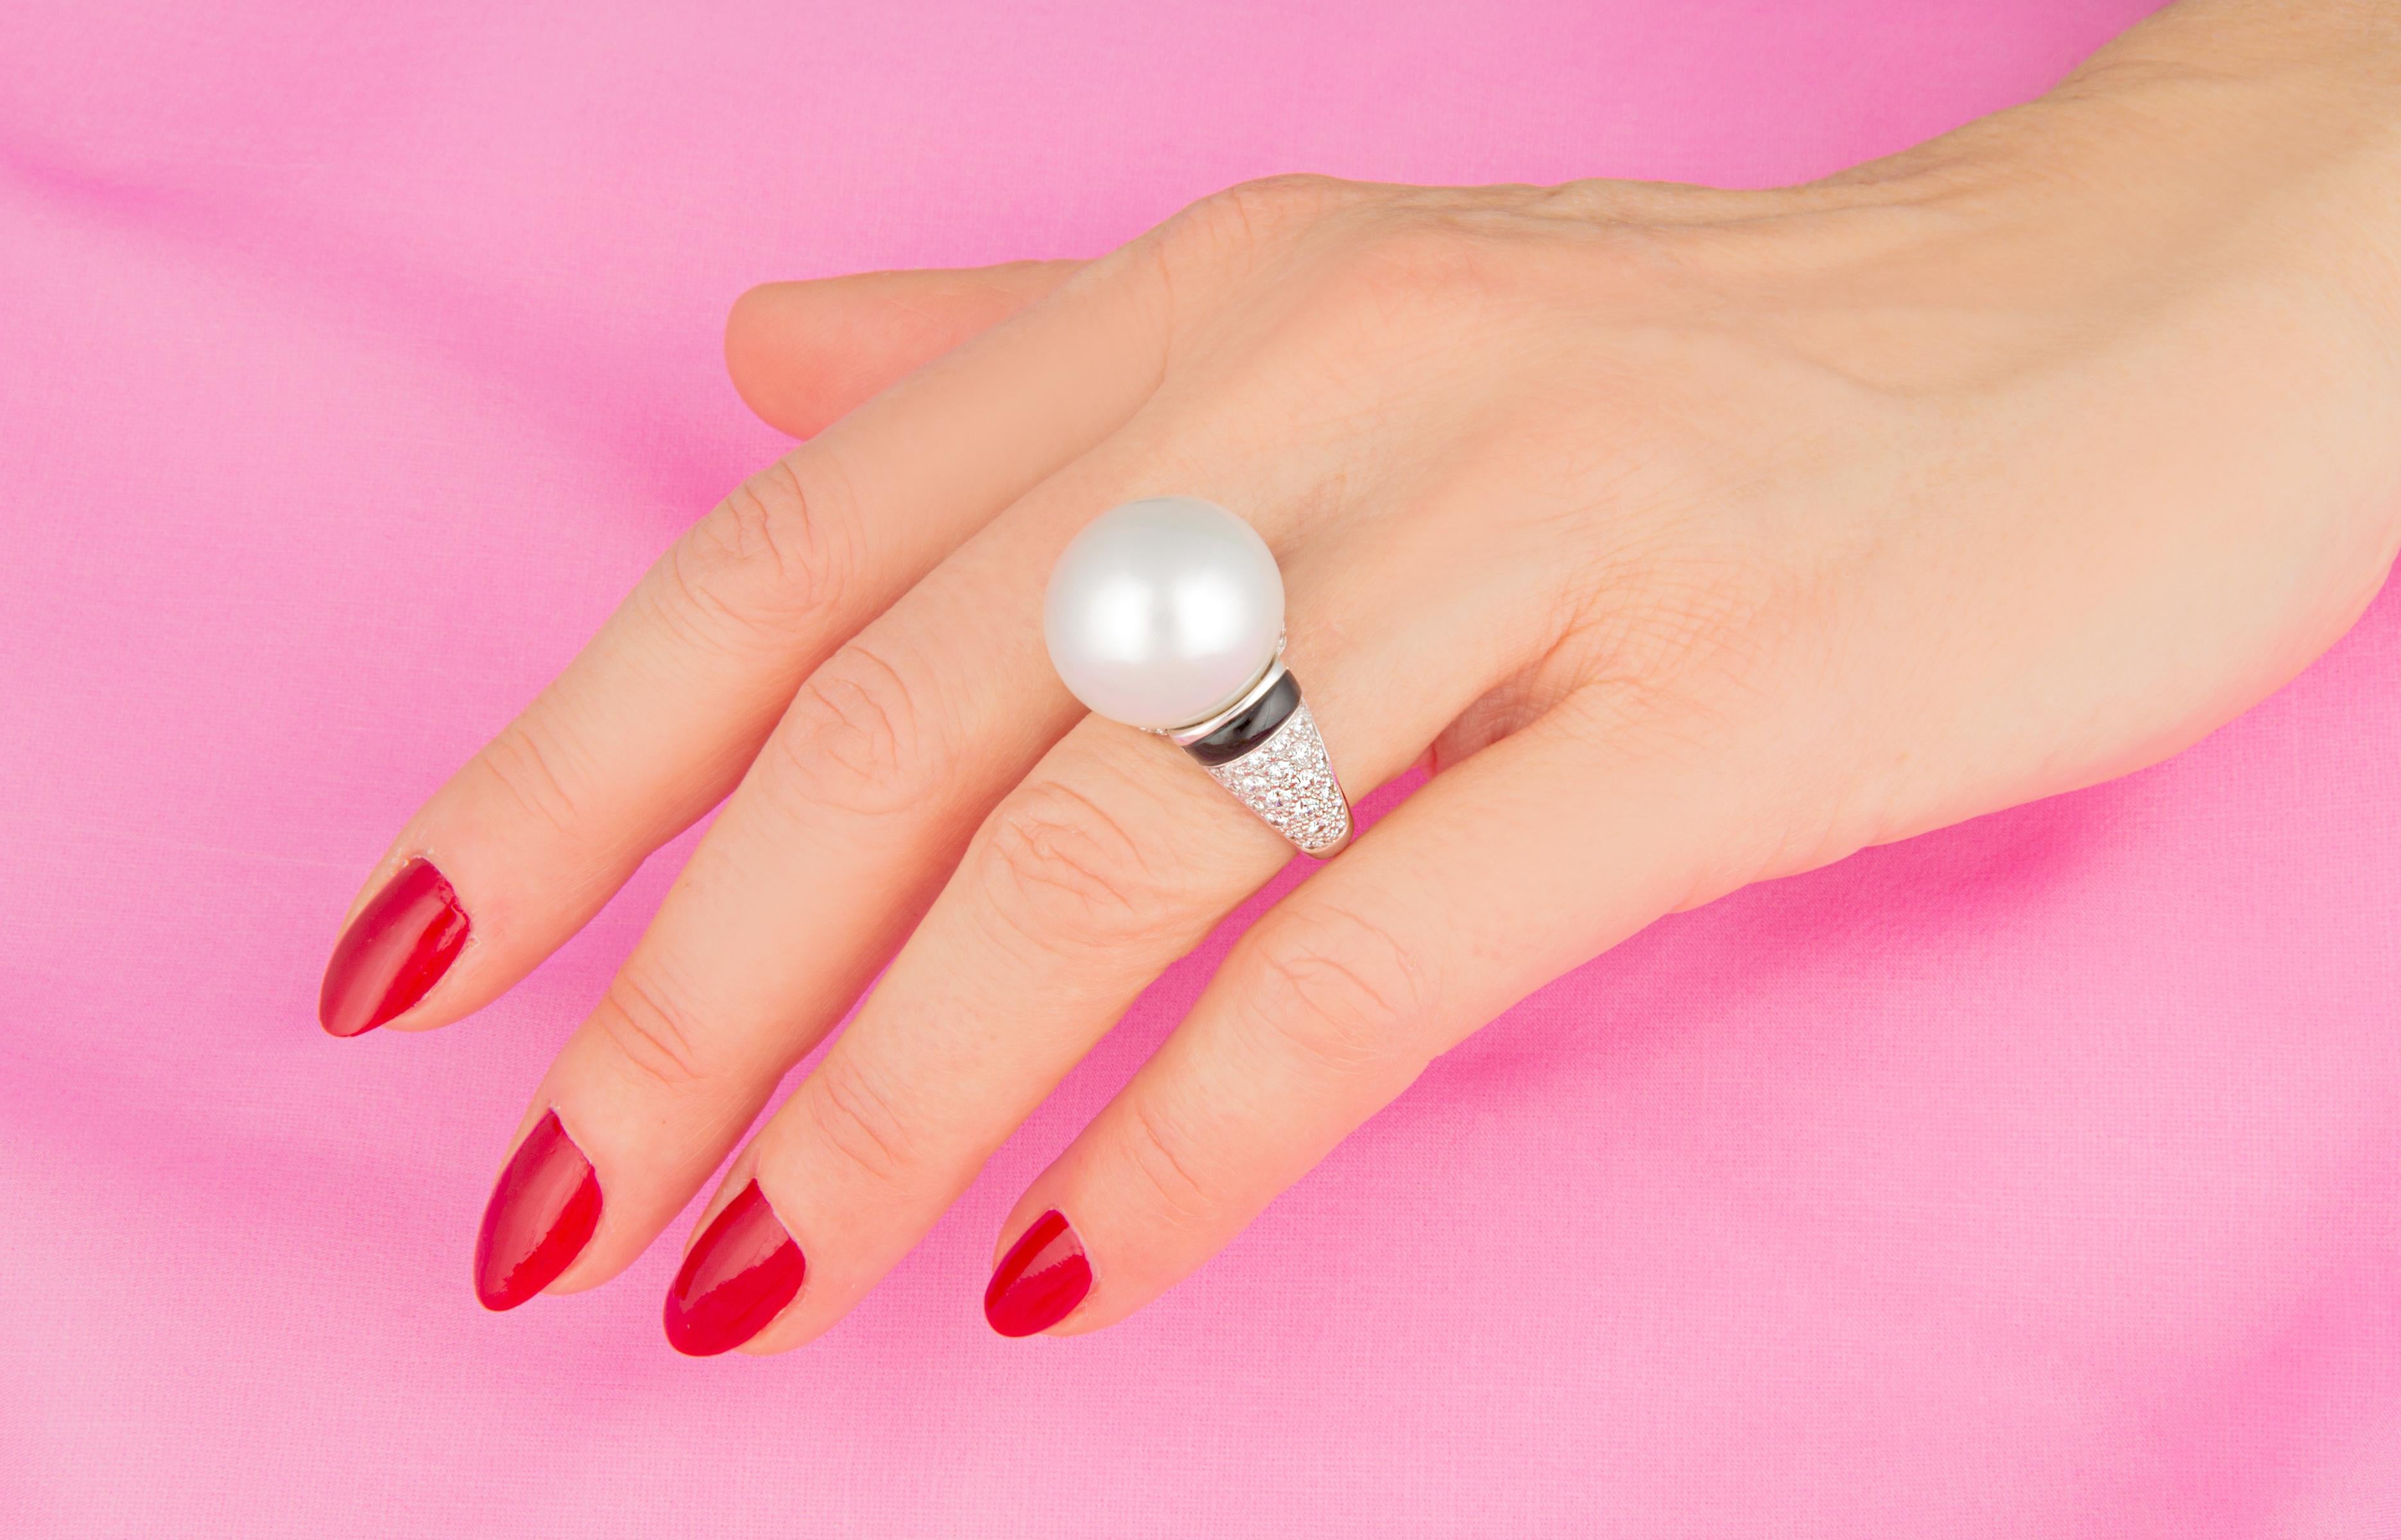 This pearl and diamond cocktail ring features a voluminous South Sea pearl of 18.5mm diameter. The pearl is untreated. It displays a fine nacre and its natural color and luster have not been enhanced in any way. The pearl is highly exposed in an